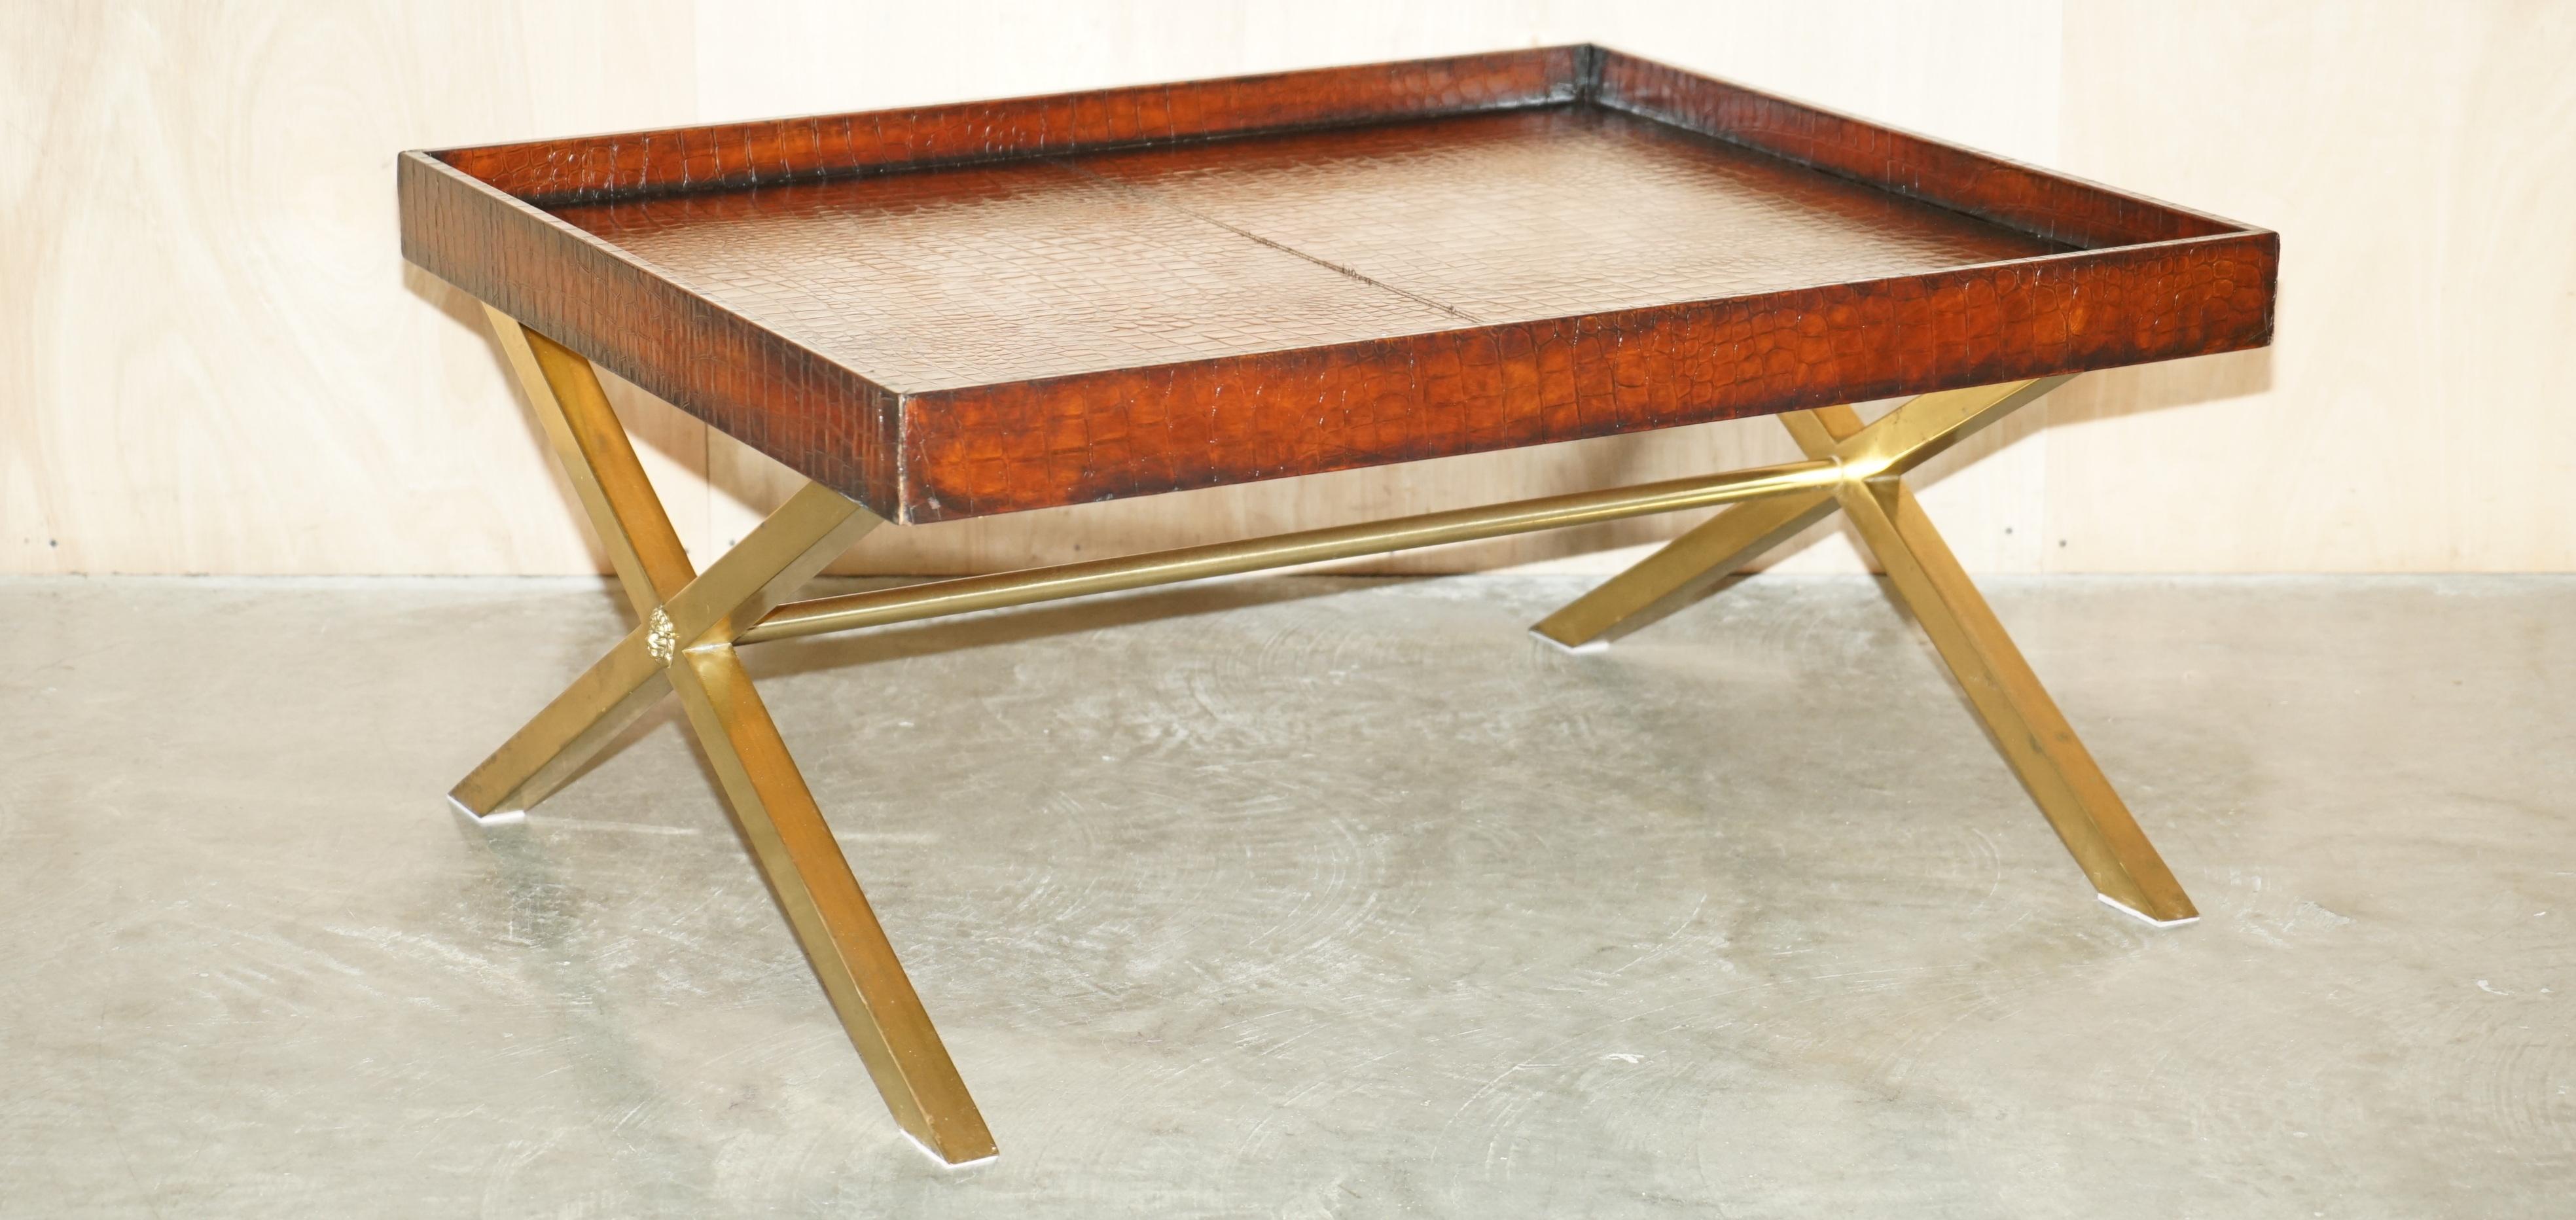 Royal House Antiques is delighted to offer for sale this stunning fully restored Ralph Lauren hand dyed cigar brown Crocodile patina leather X framed coffee or cocktail table with Lion's had central mains

This is the only one of these tables